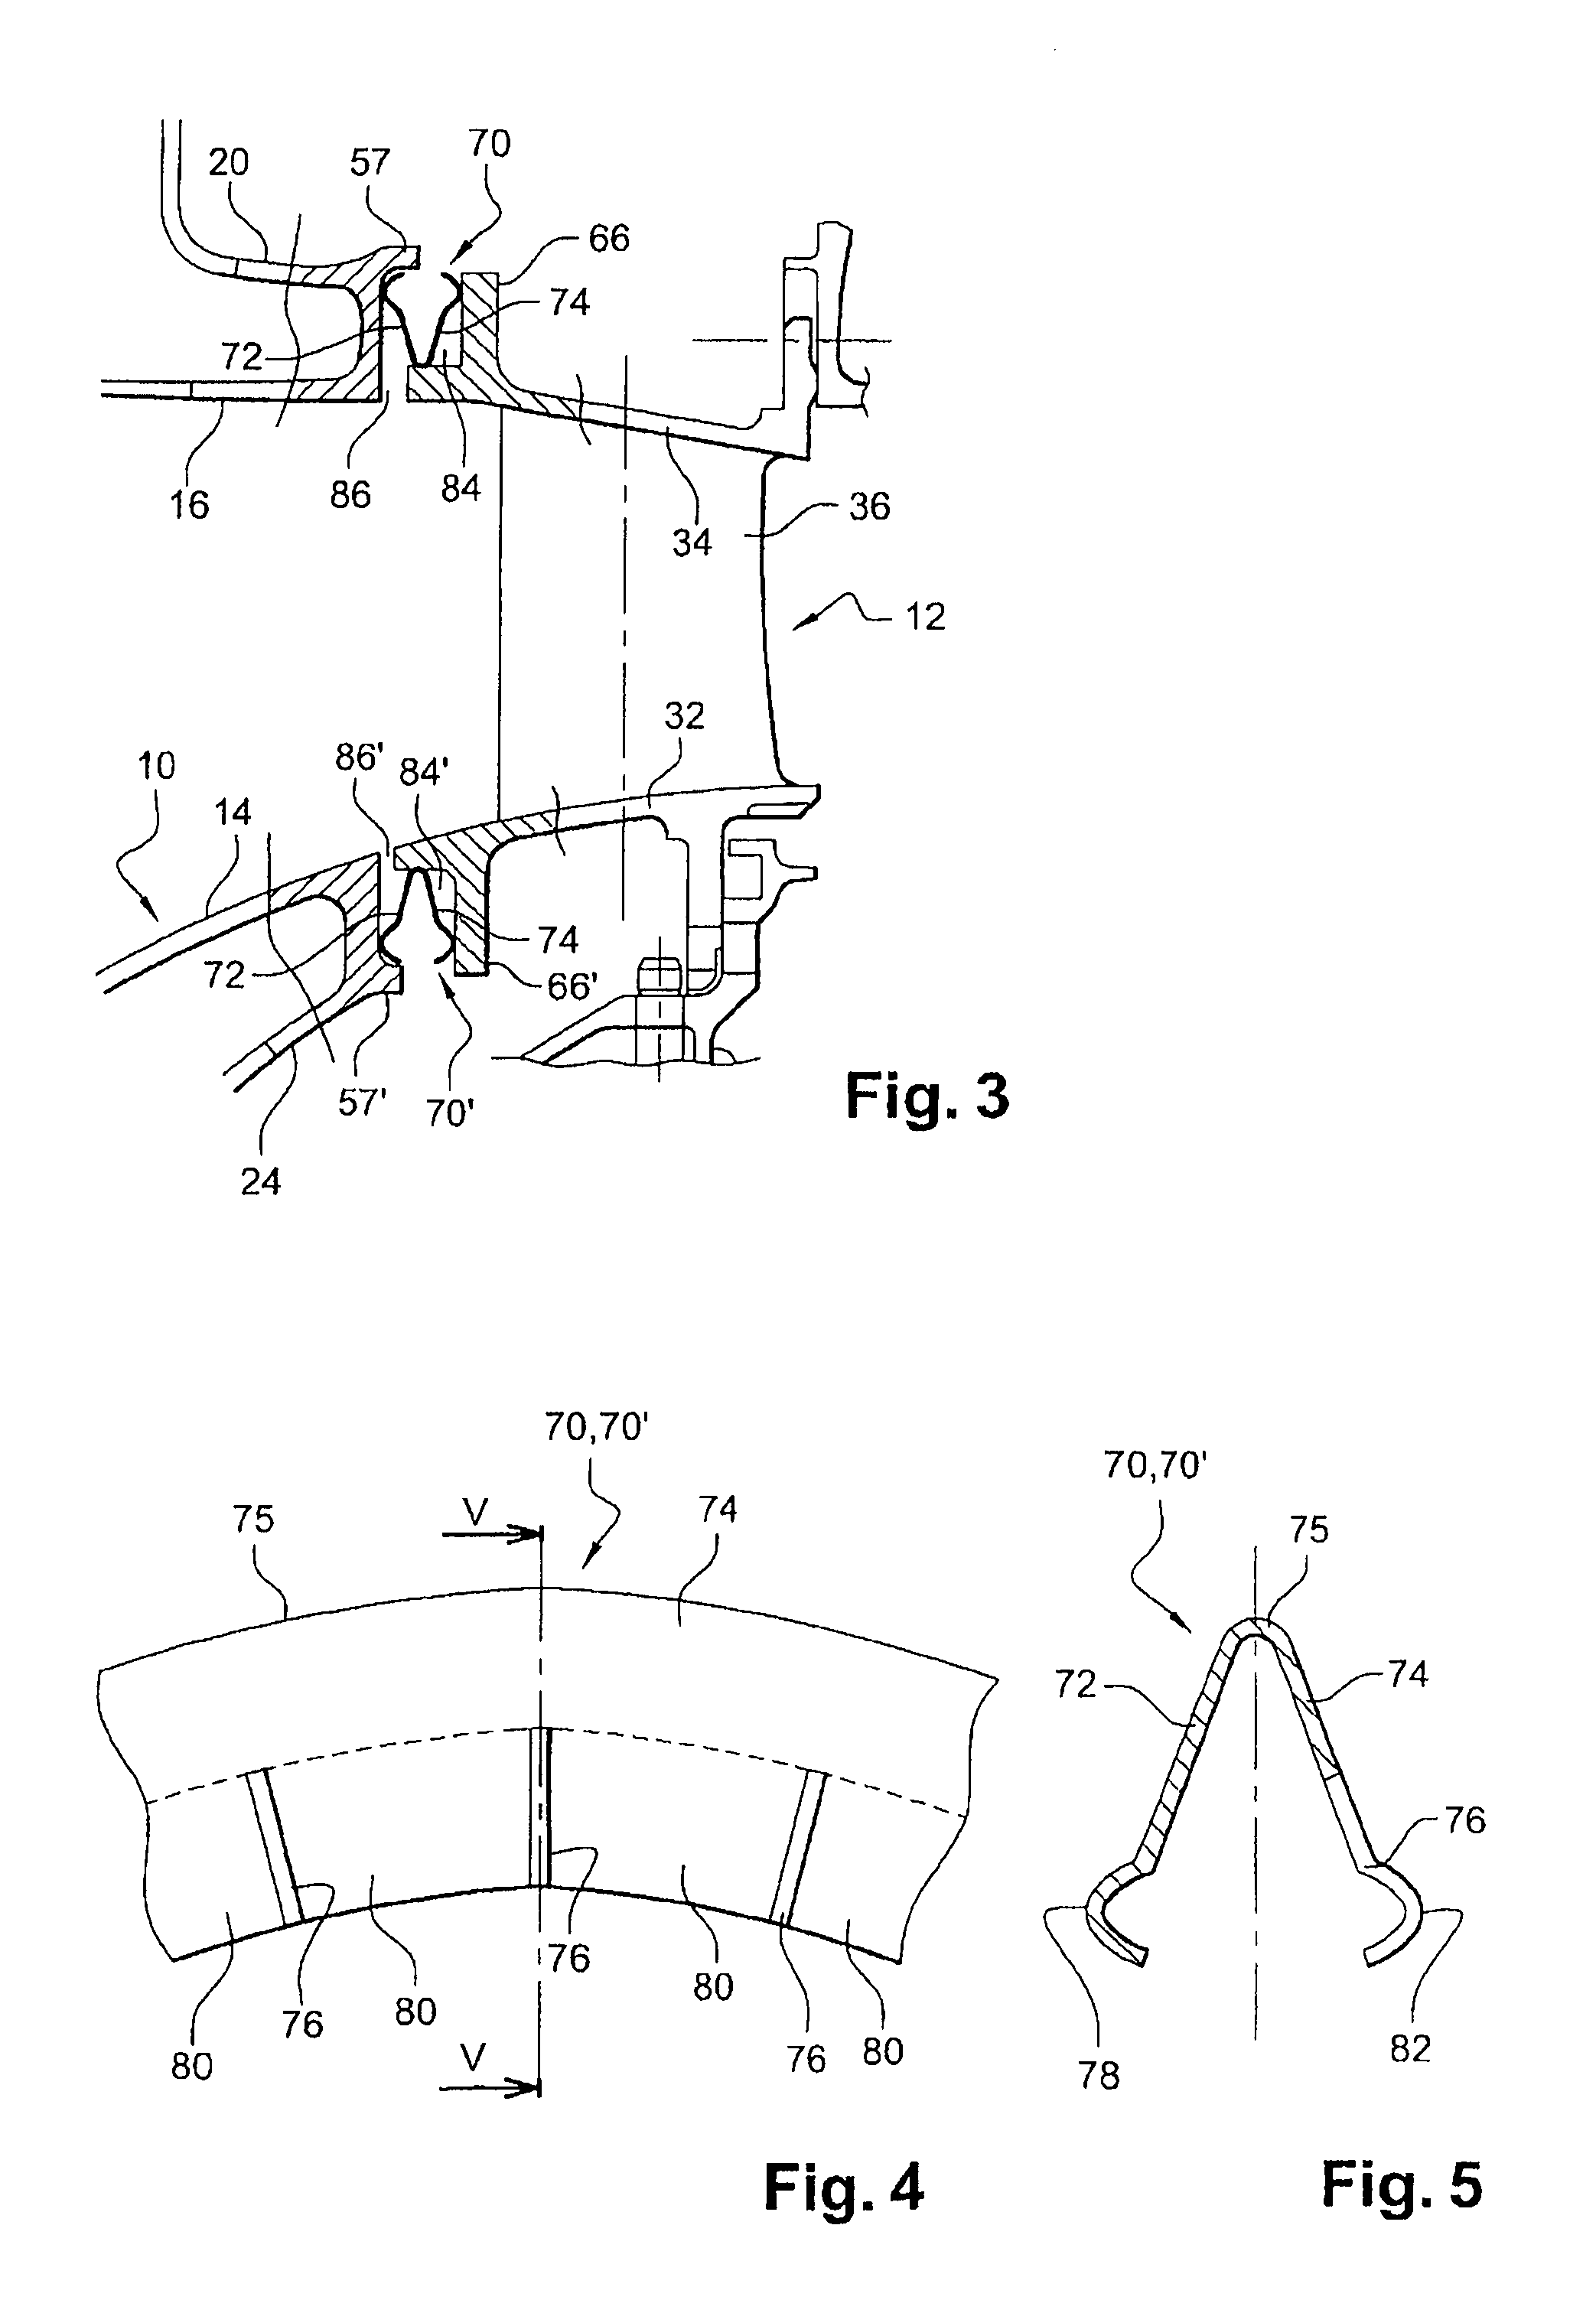 Sealing between a combustion chamber and a turbine nozzle in a turbomachine